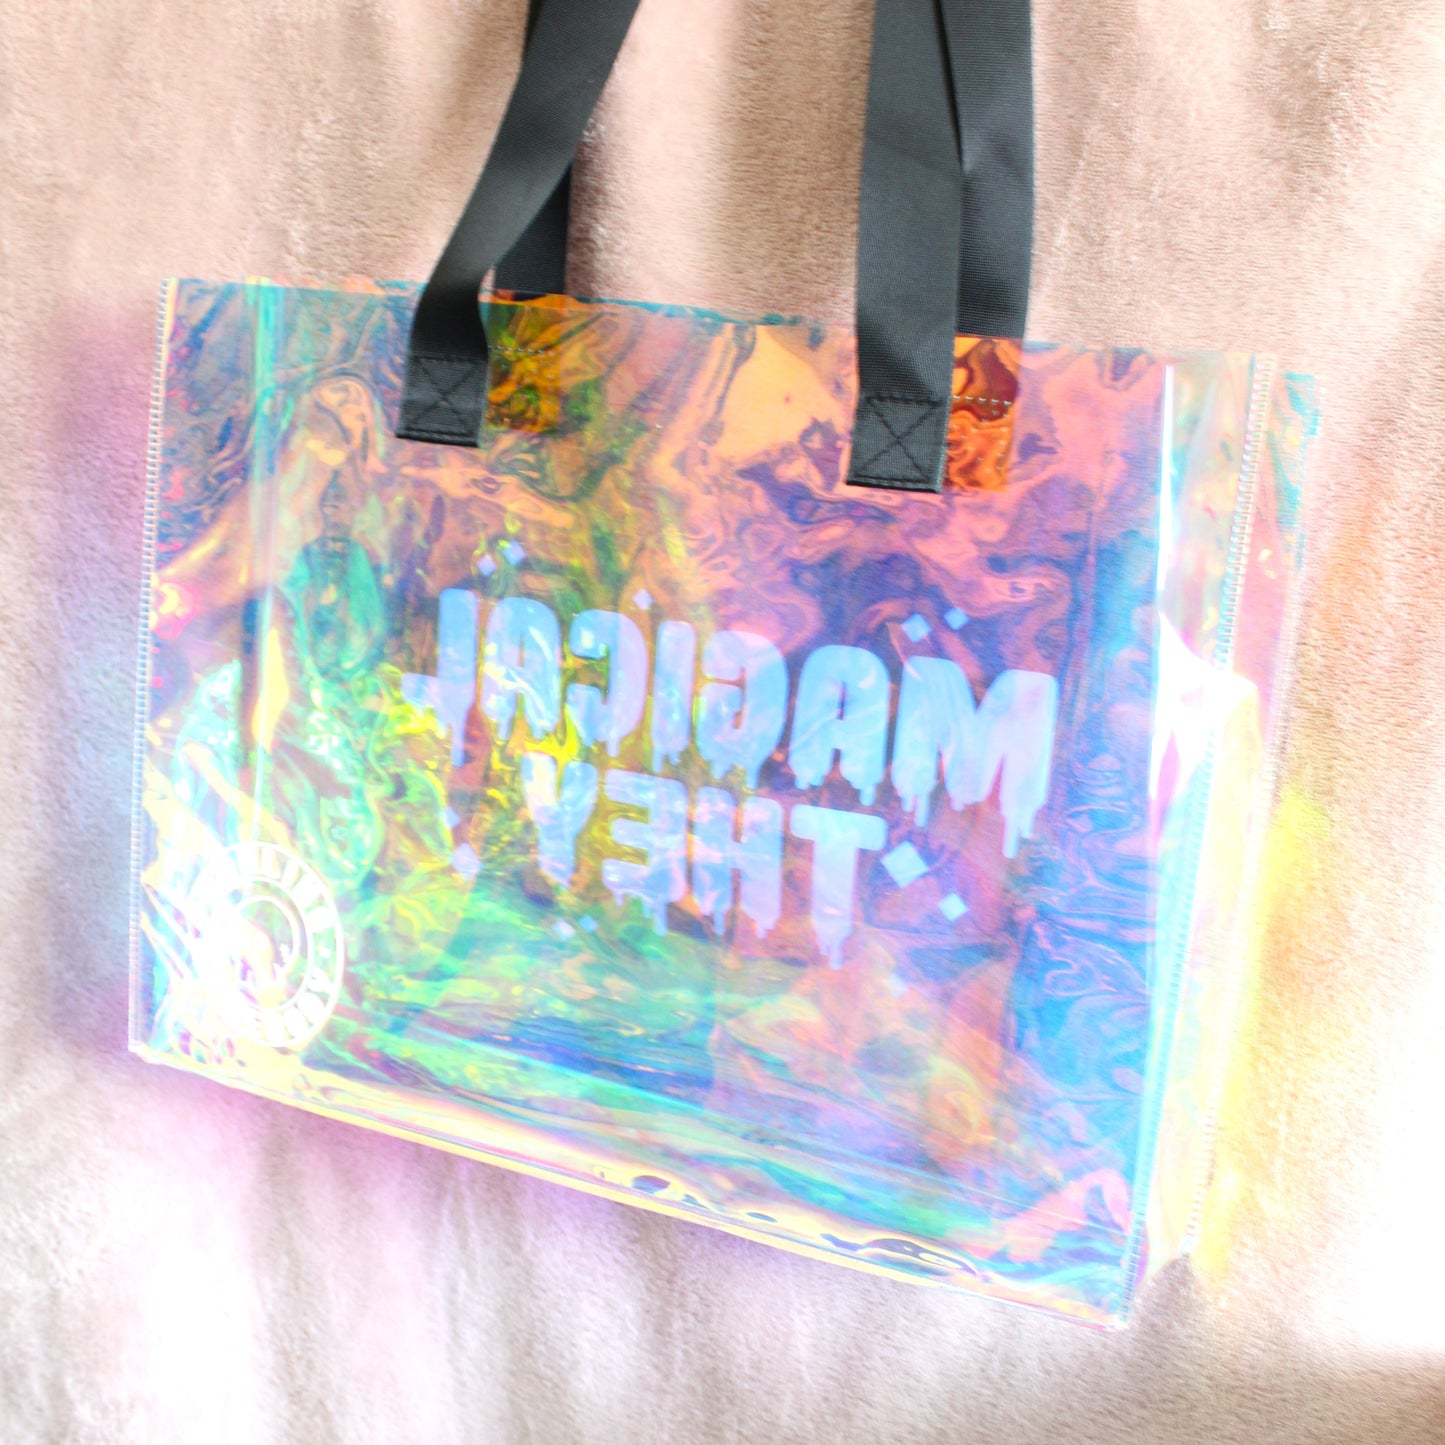 Magical They Holographic Tote Bag. Large Rainbow Waterproof Bag.